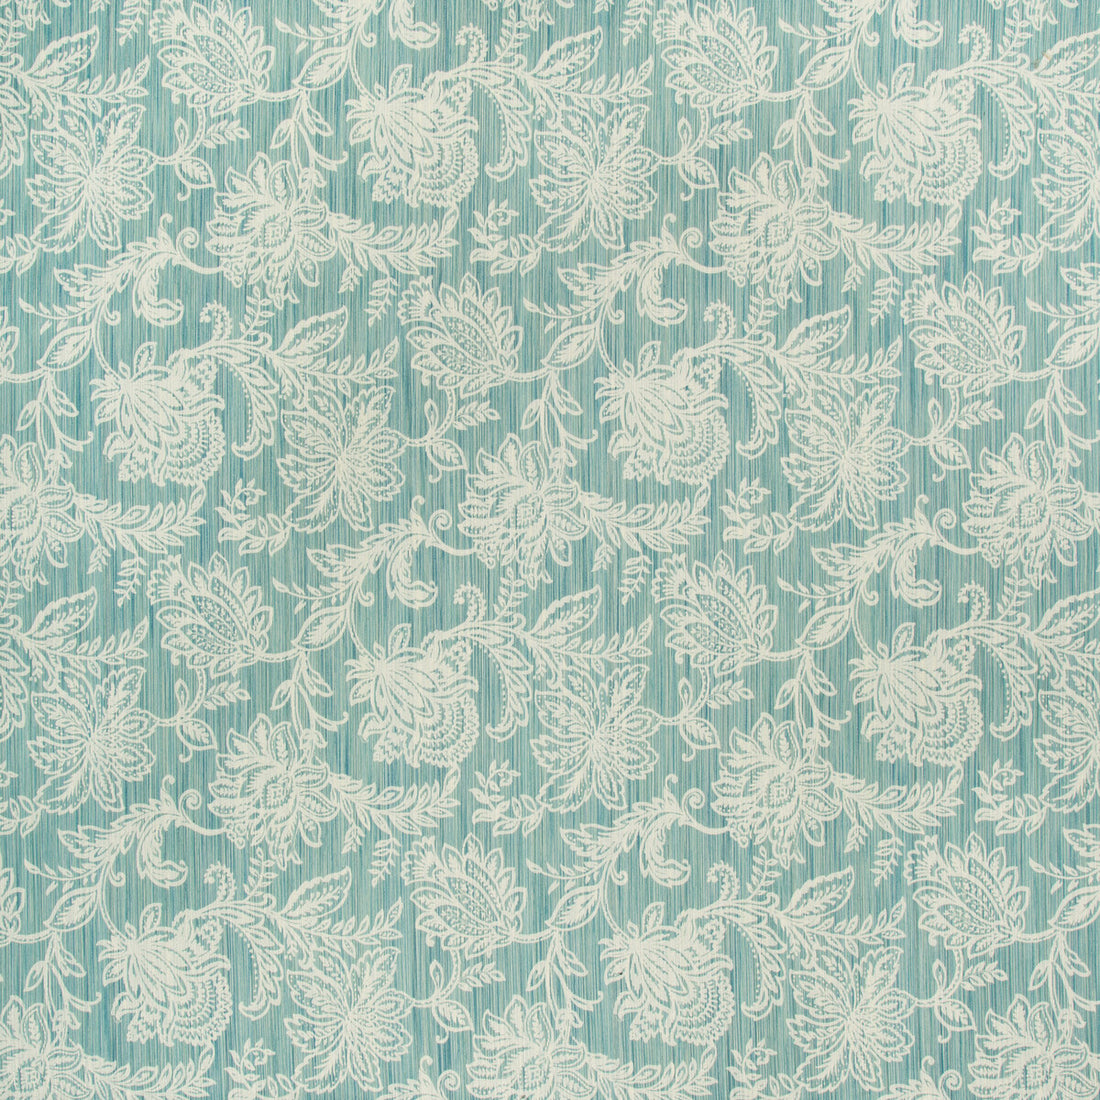 Kravet Design fabric in 34705-1615 color - pattern 34705.1615.0 - by Kravet Design in the Performance Crypton Home collection